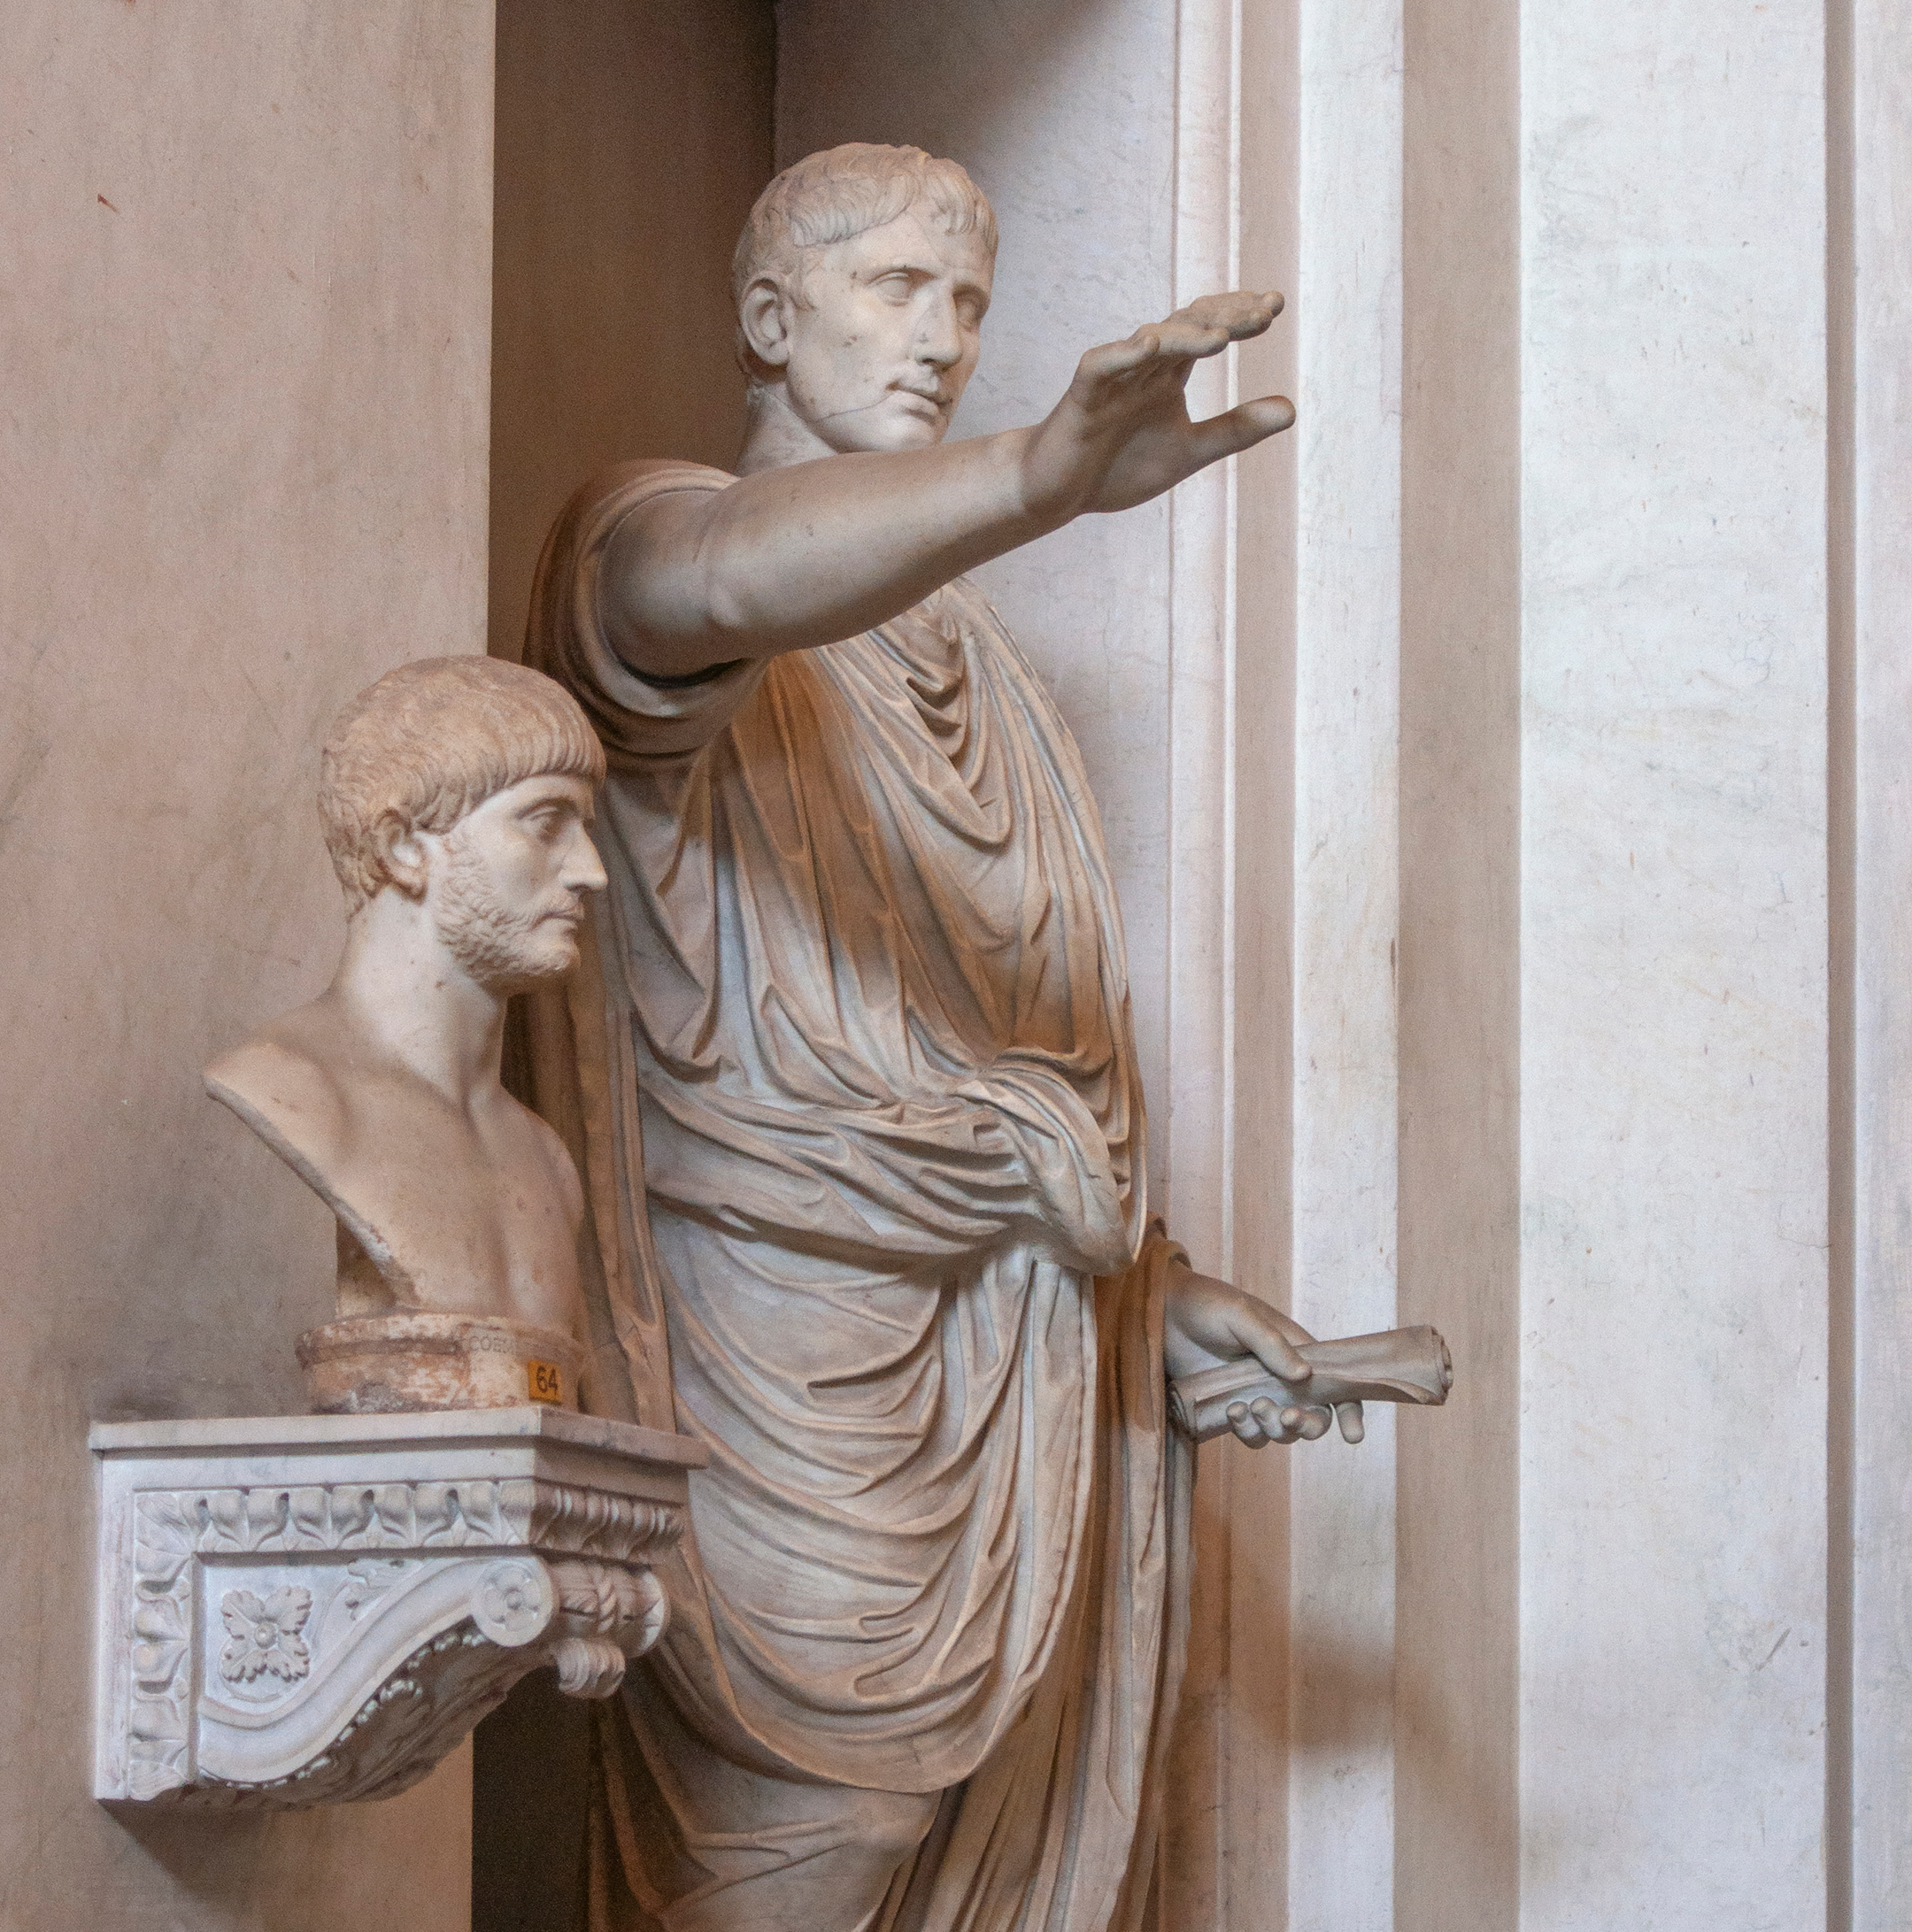 Statue of Julius Caesar pointing from a vestibule in a wall